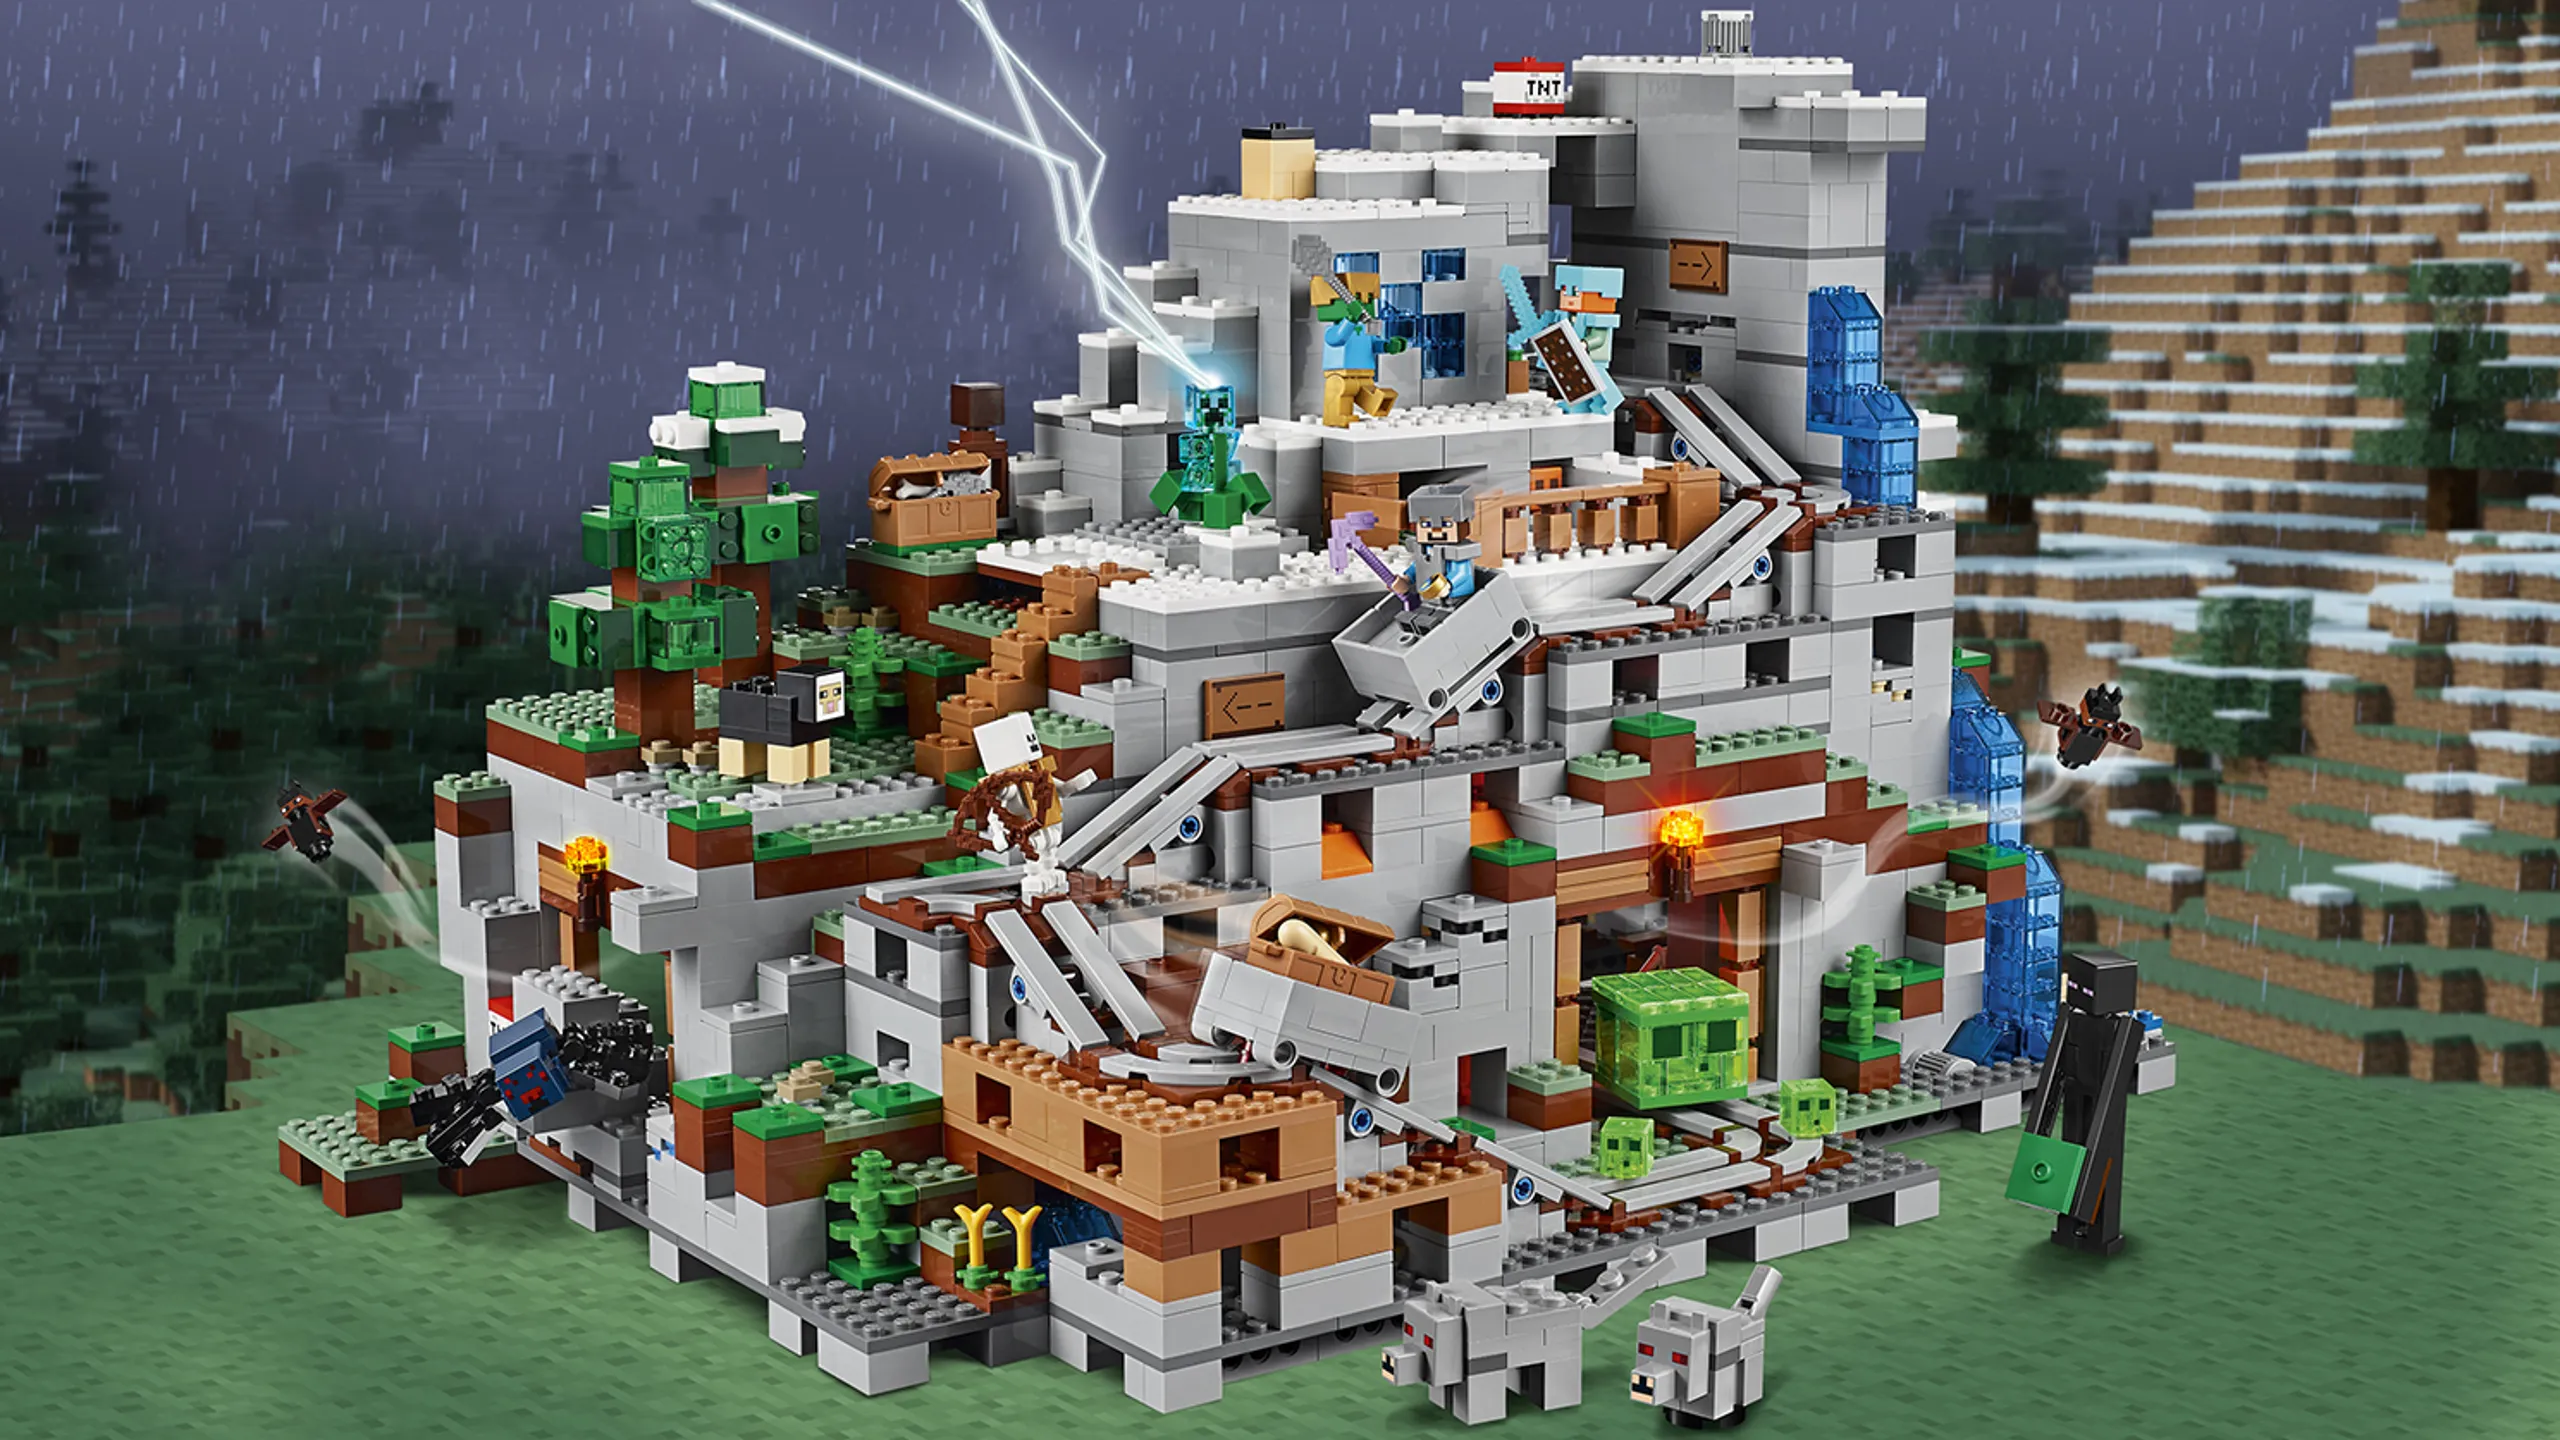 LEGO Minecraft - 21137 Mountain Cave Set - Explore the biggest LEGO Minecraft set so far! With railroads and hidden caves this set opens up for hours of building and play.